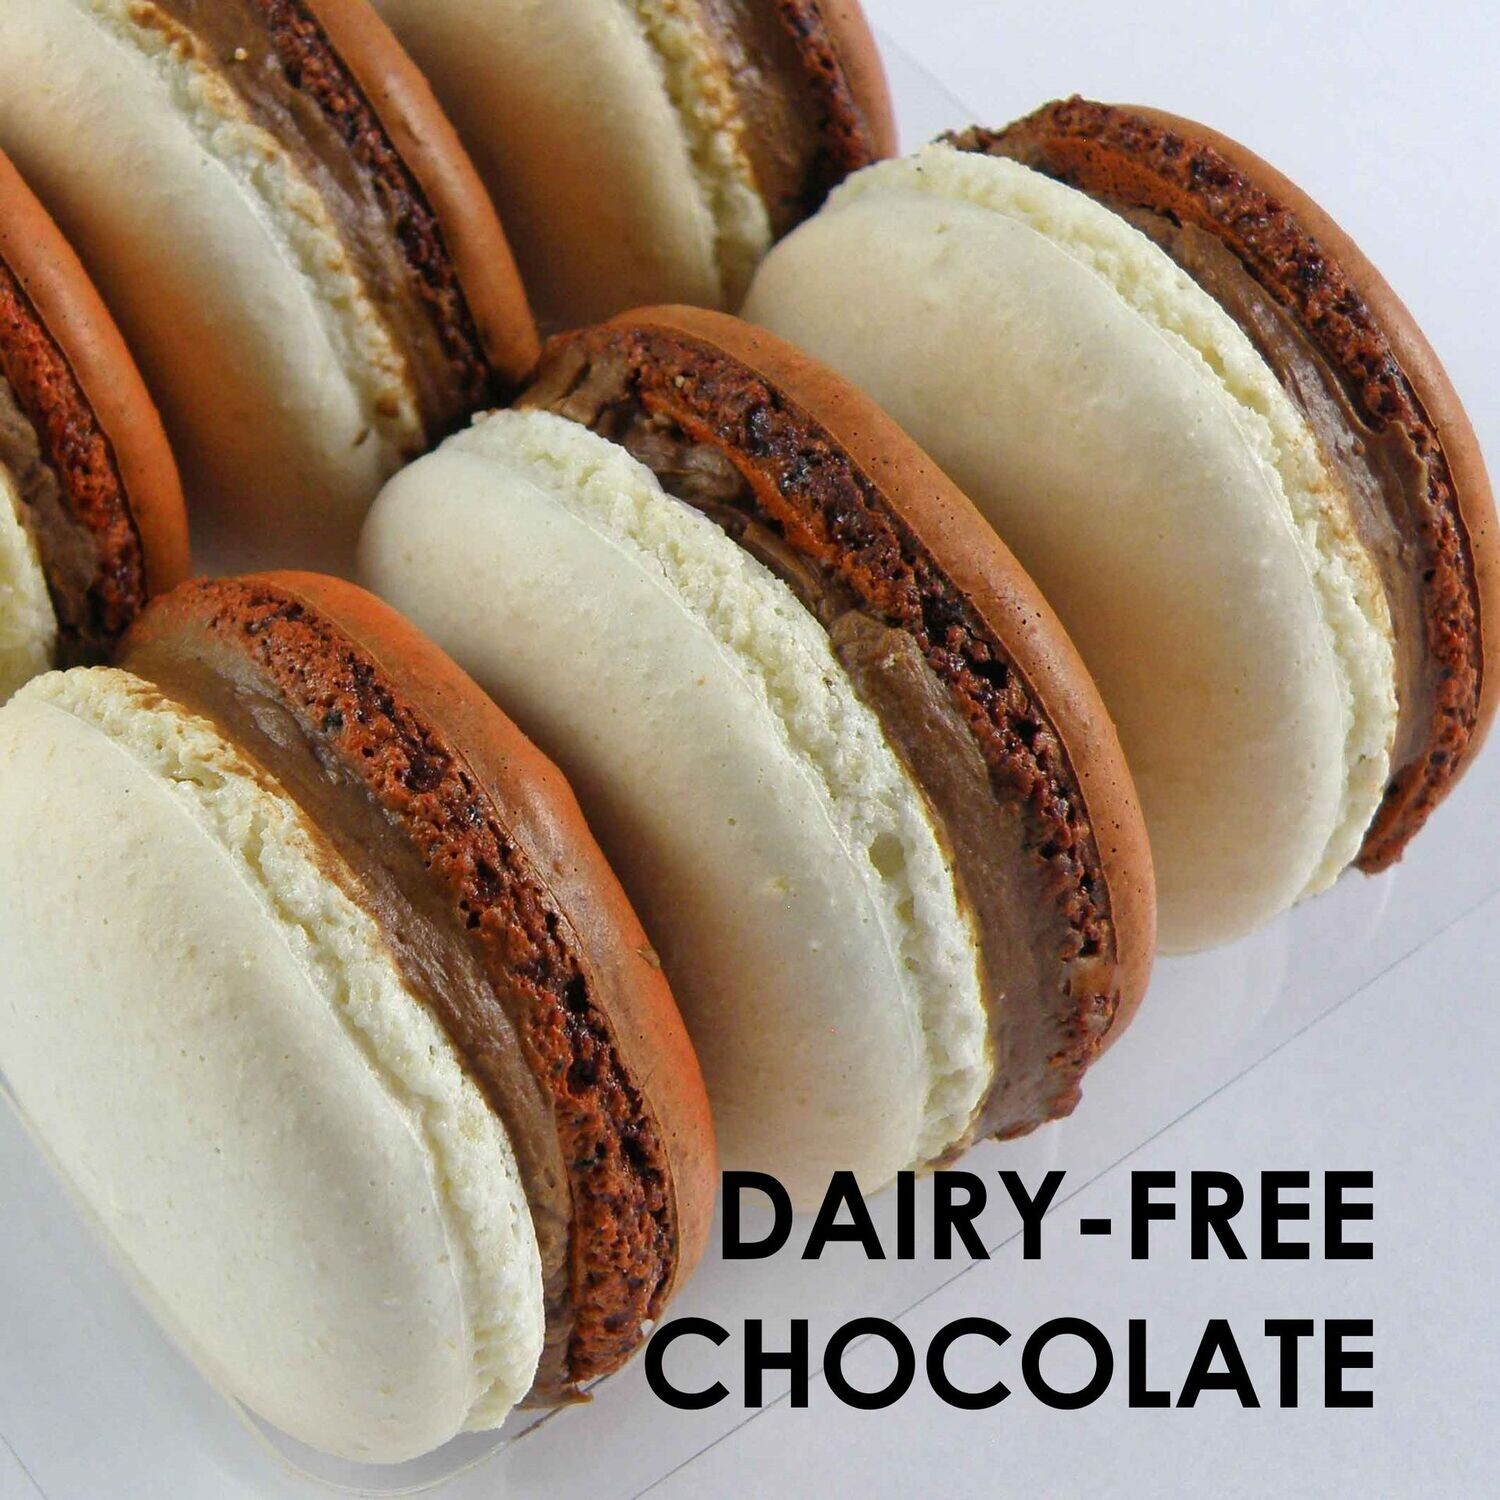 Dairy-free Macaroons (made with Coconut Butter) - gift box of 20 (we select the flavours)